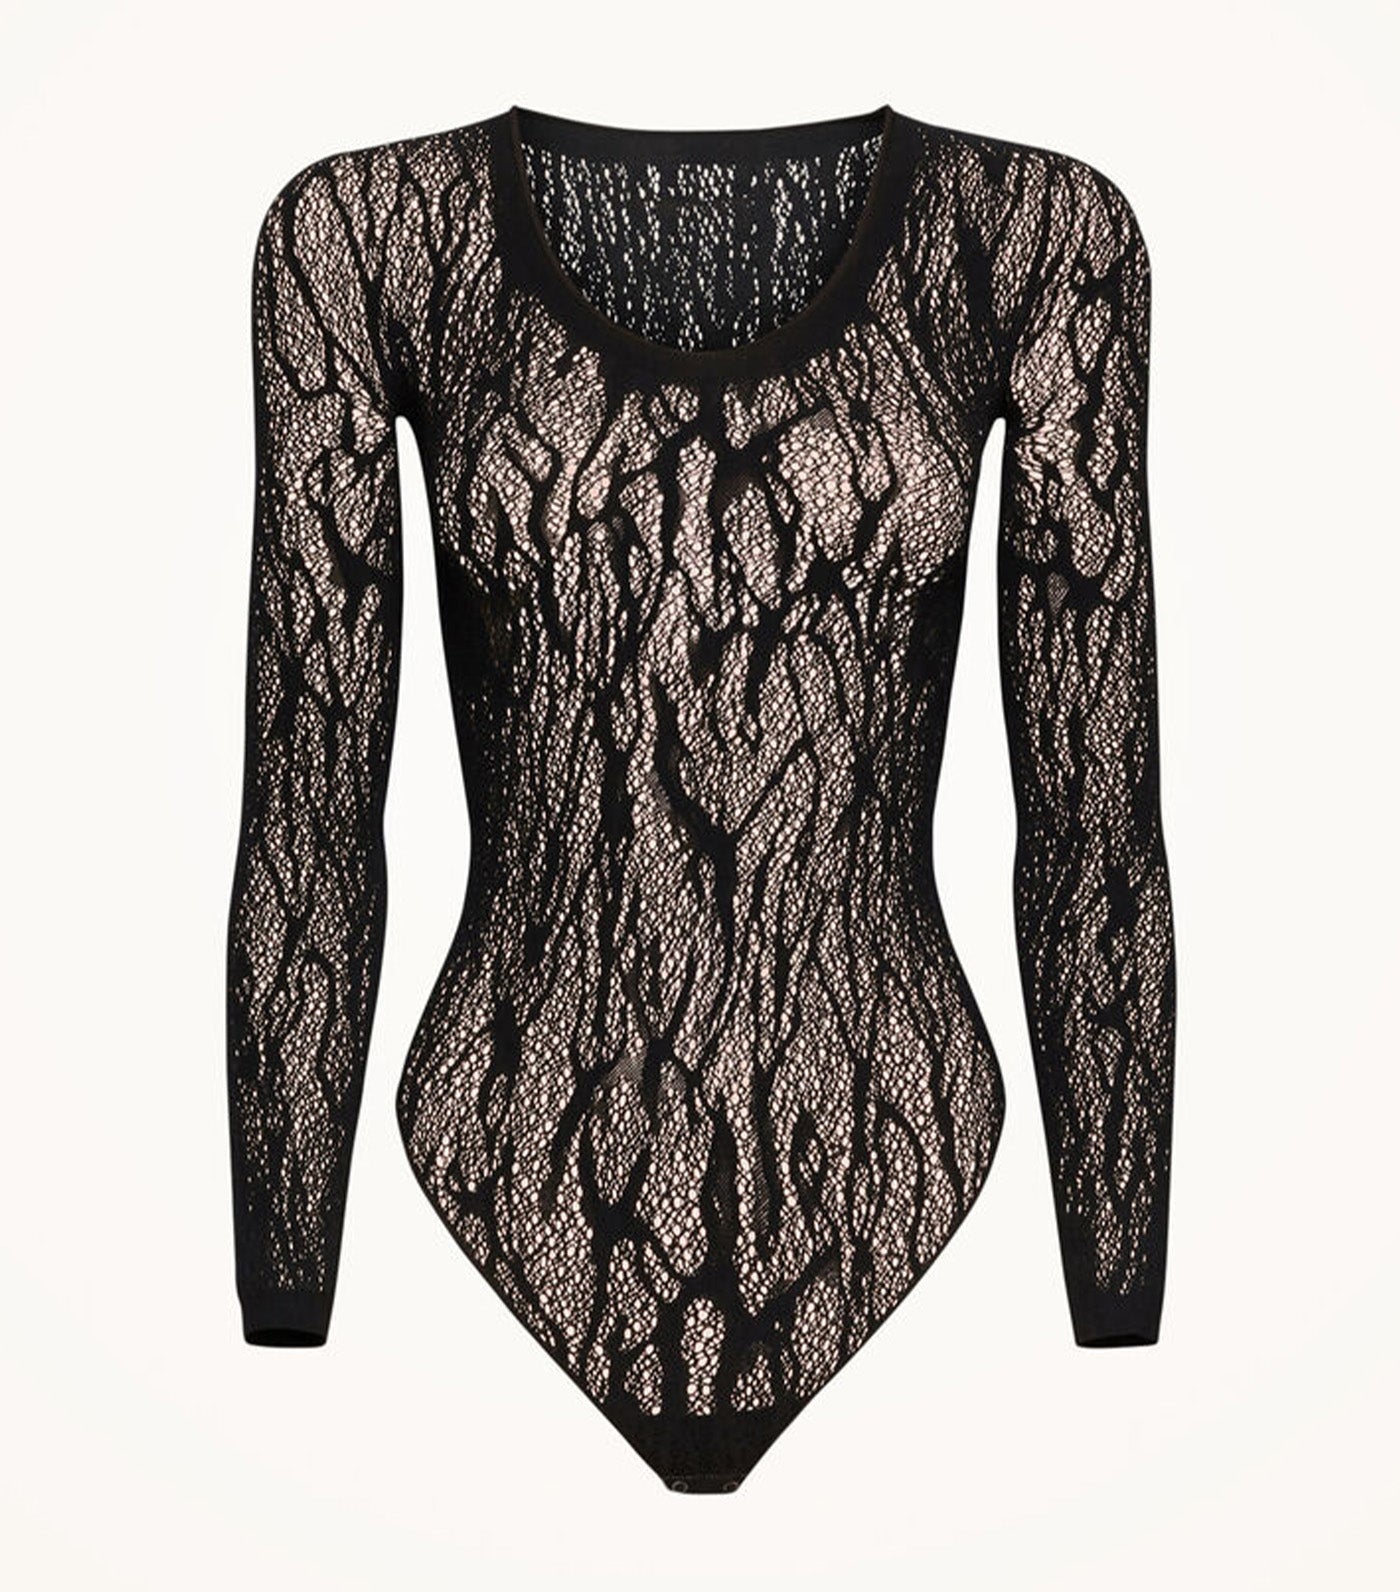 Wolford Buenos Aires String Bodysuit Black